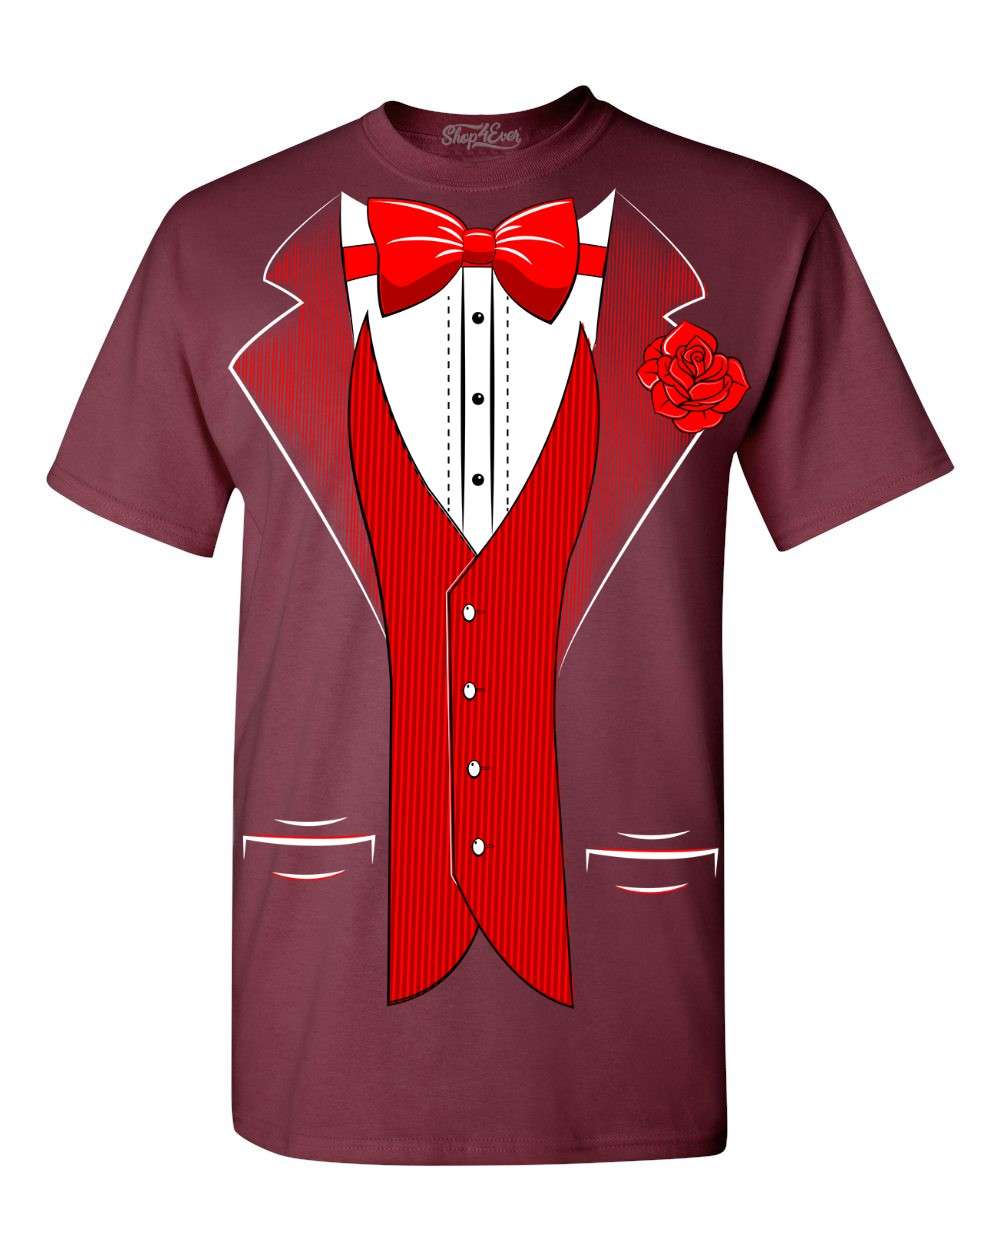 Tuxedo Formal Classy But Casual Red Bow Tie Suit Wedding Mens V-neck T-shirt